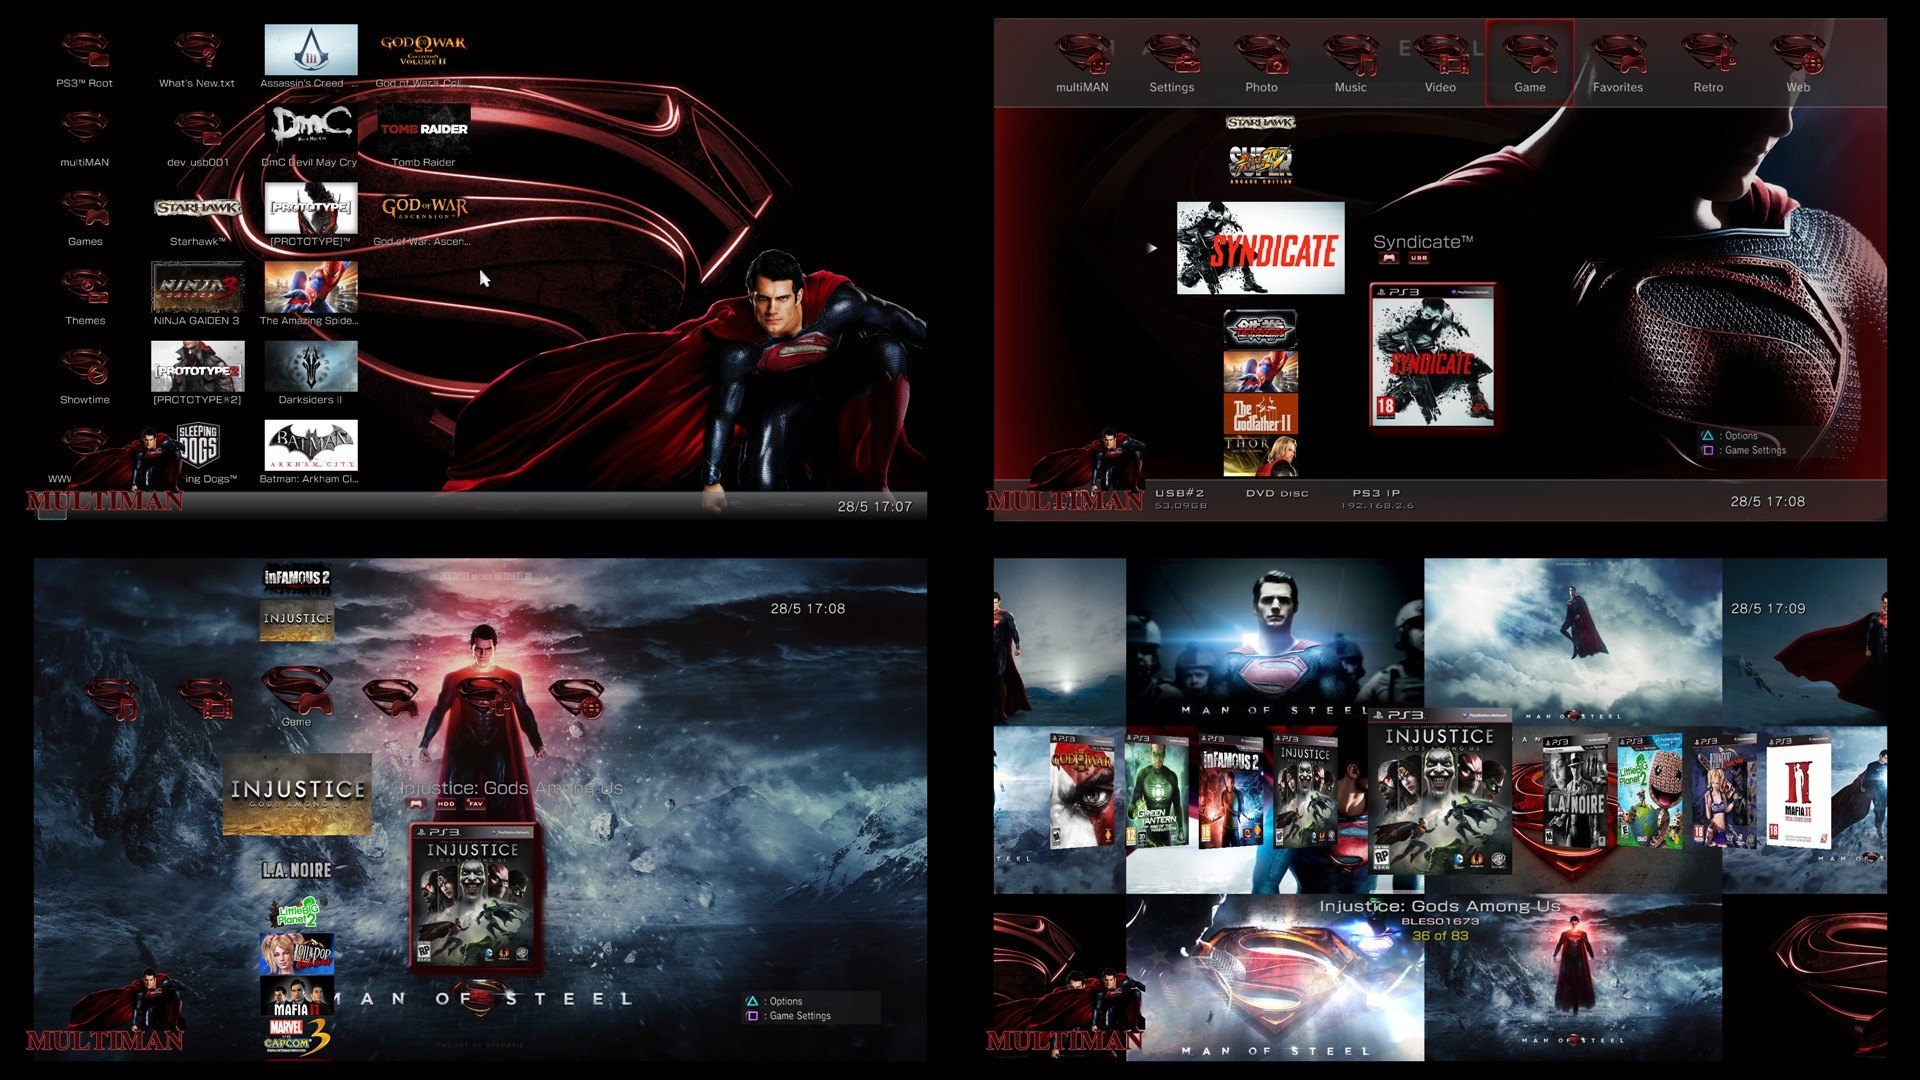 Ps3 игры multiman. Ps3 Themes PLAYSTATION. Темы для ps3. Крутые темы на ps3. Multiman ps3.